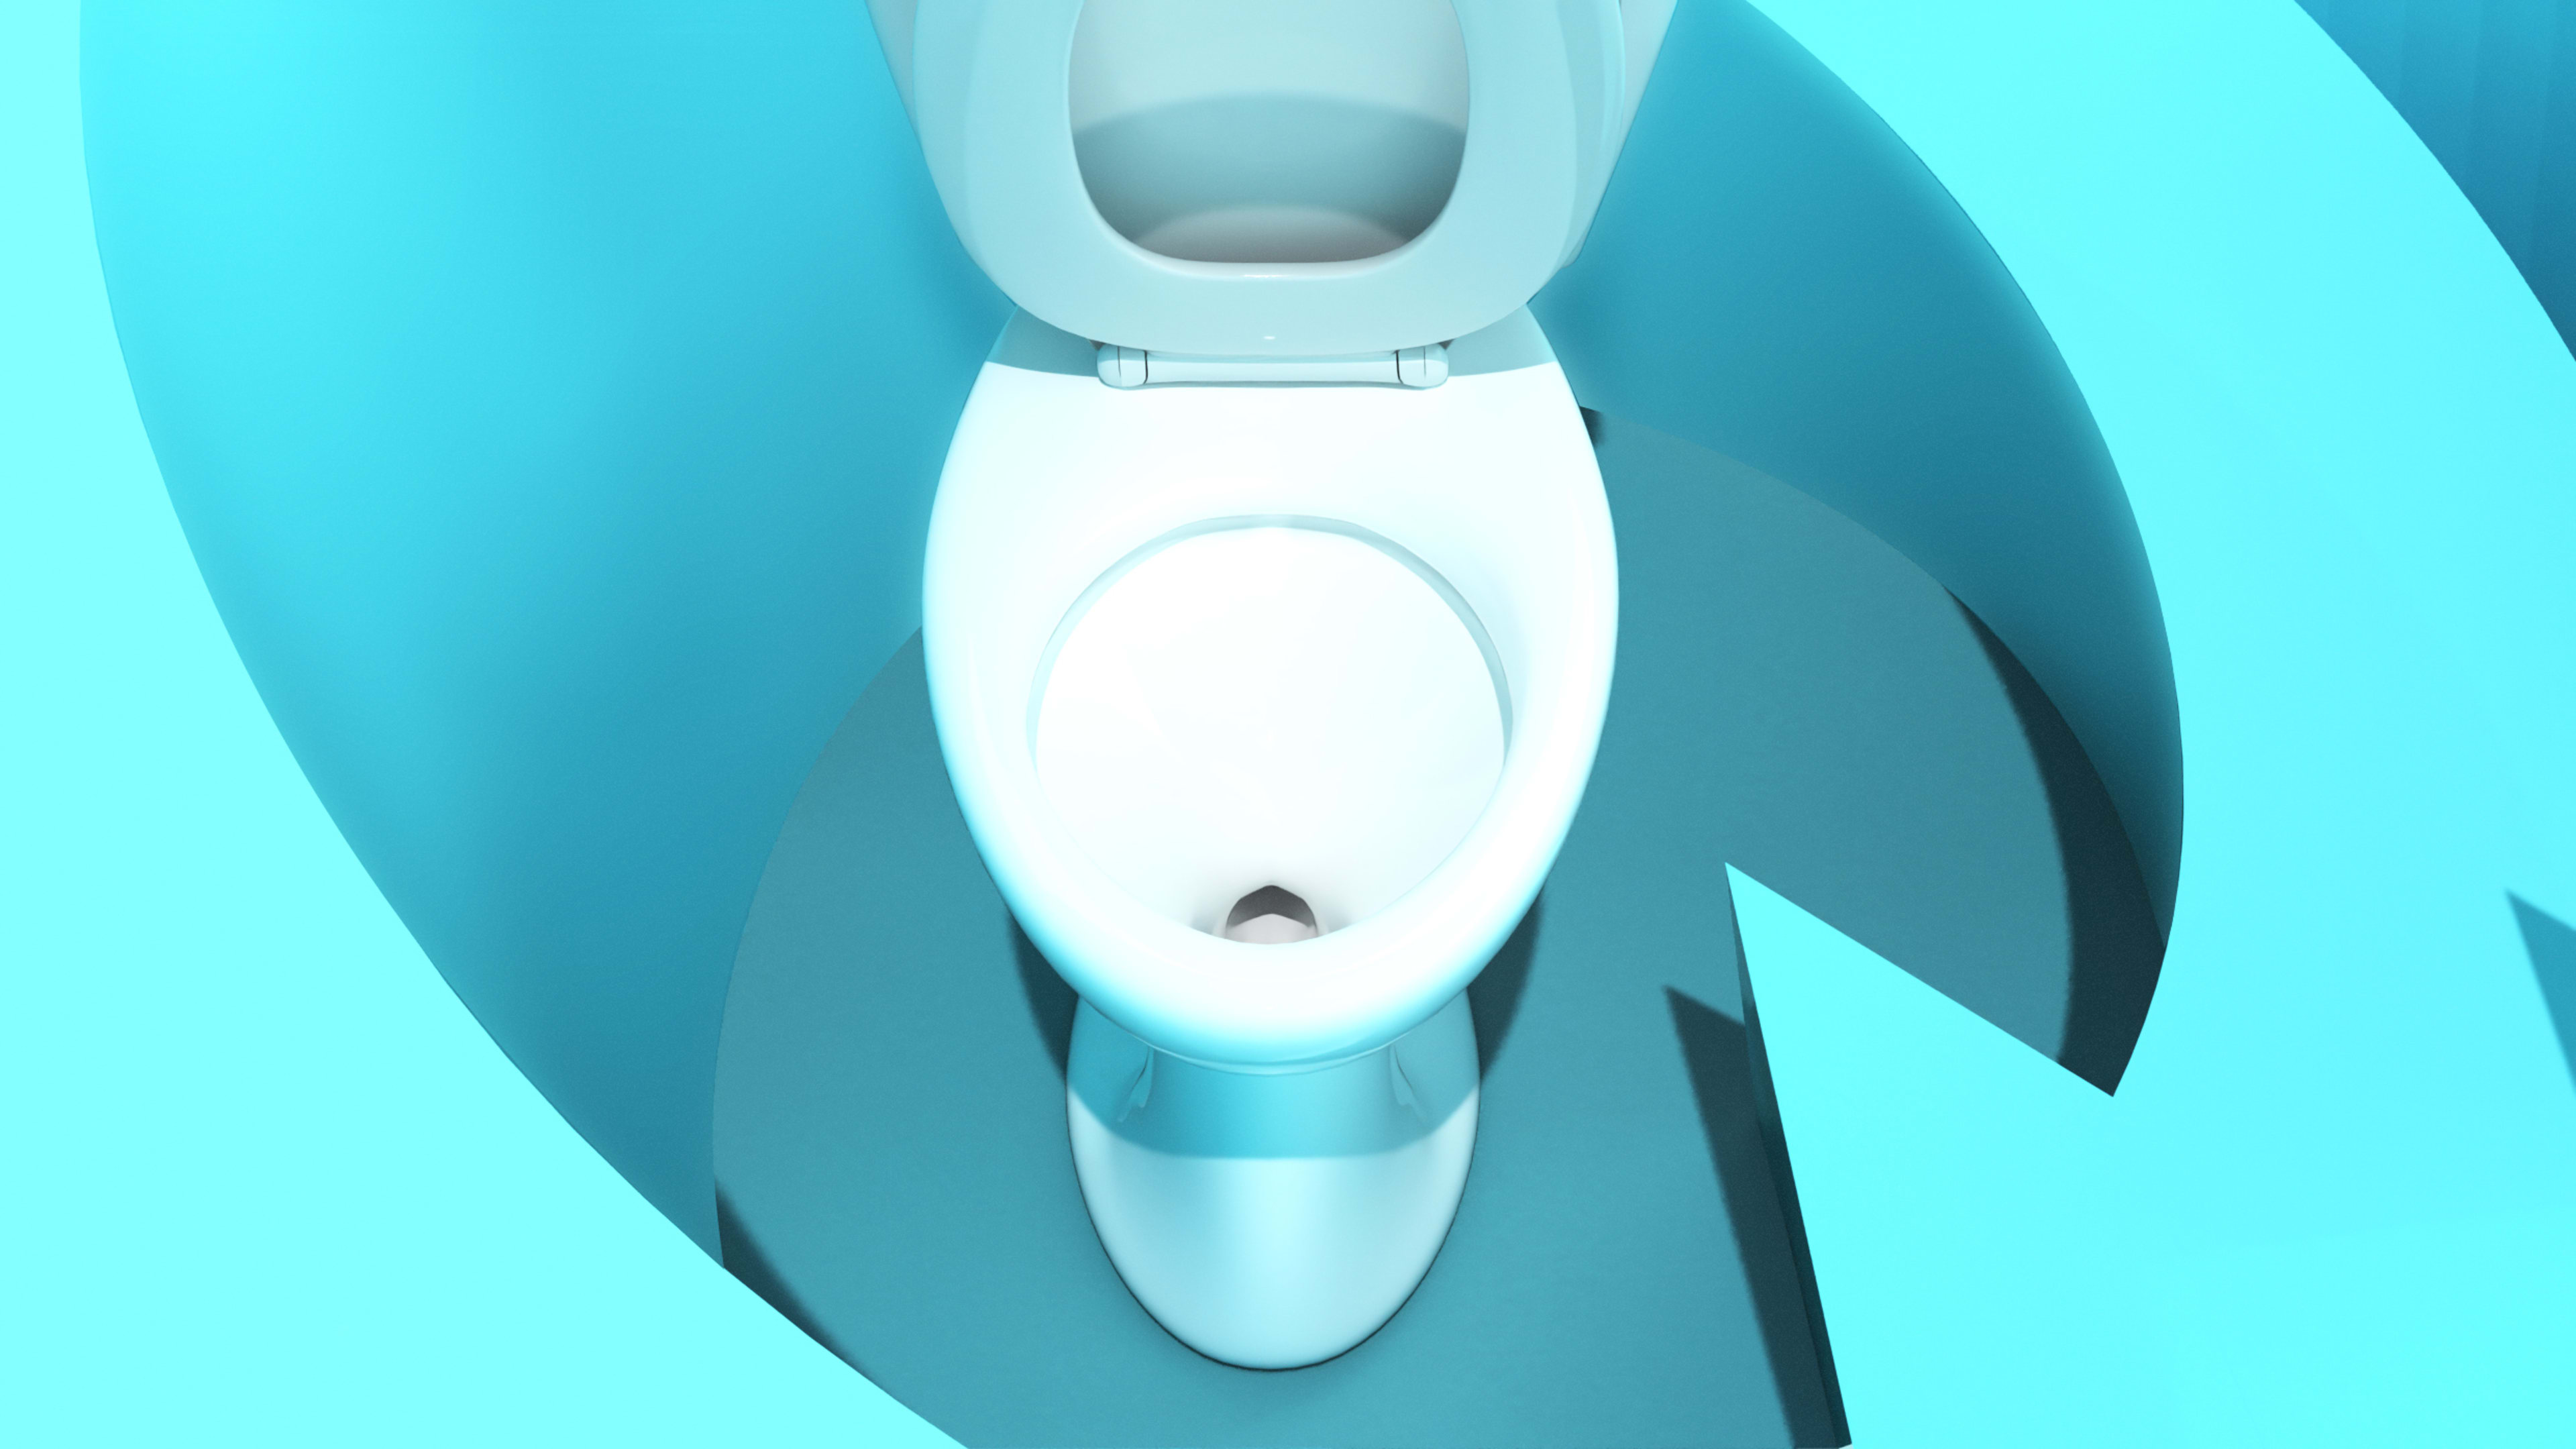 This new magical coating saves water by making toilets so slippery that poop basically flushes itself